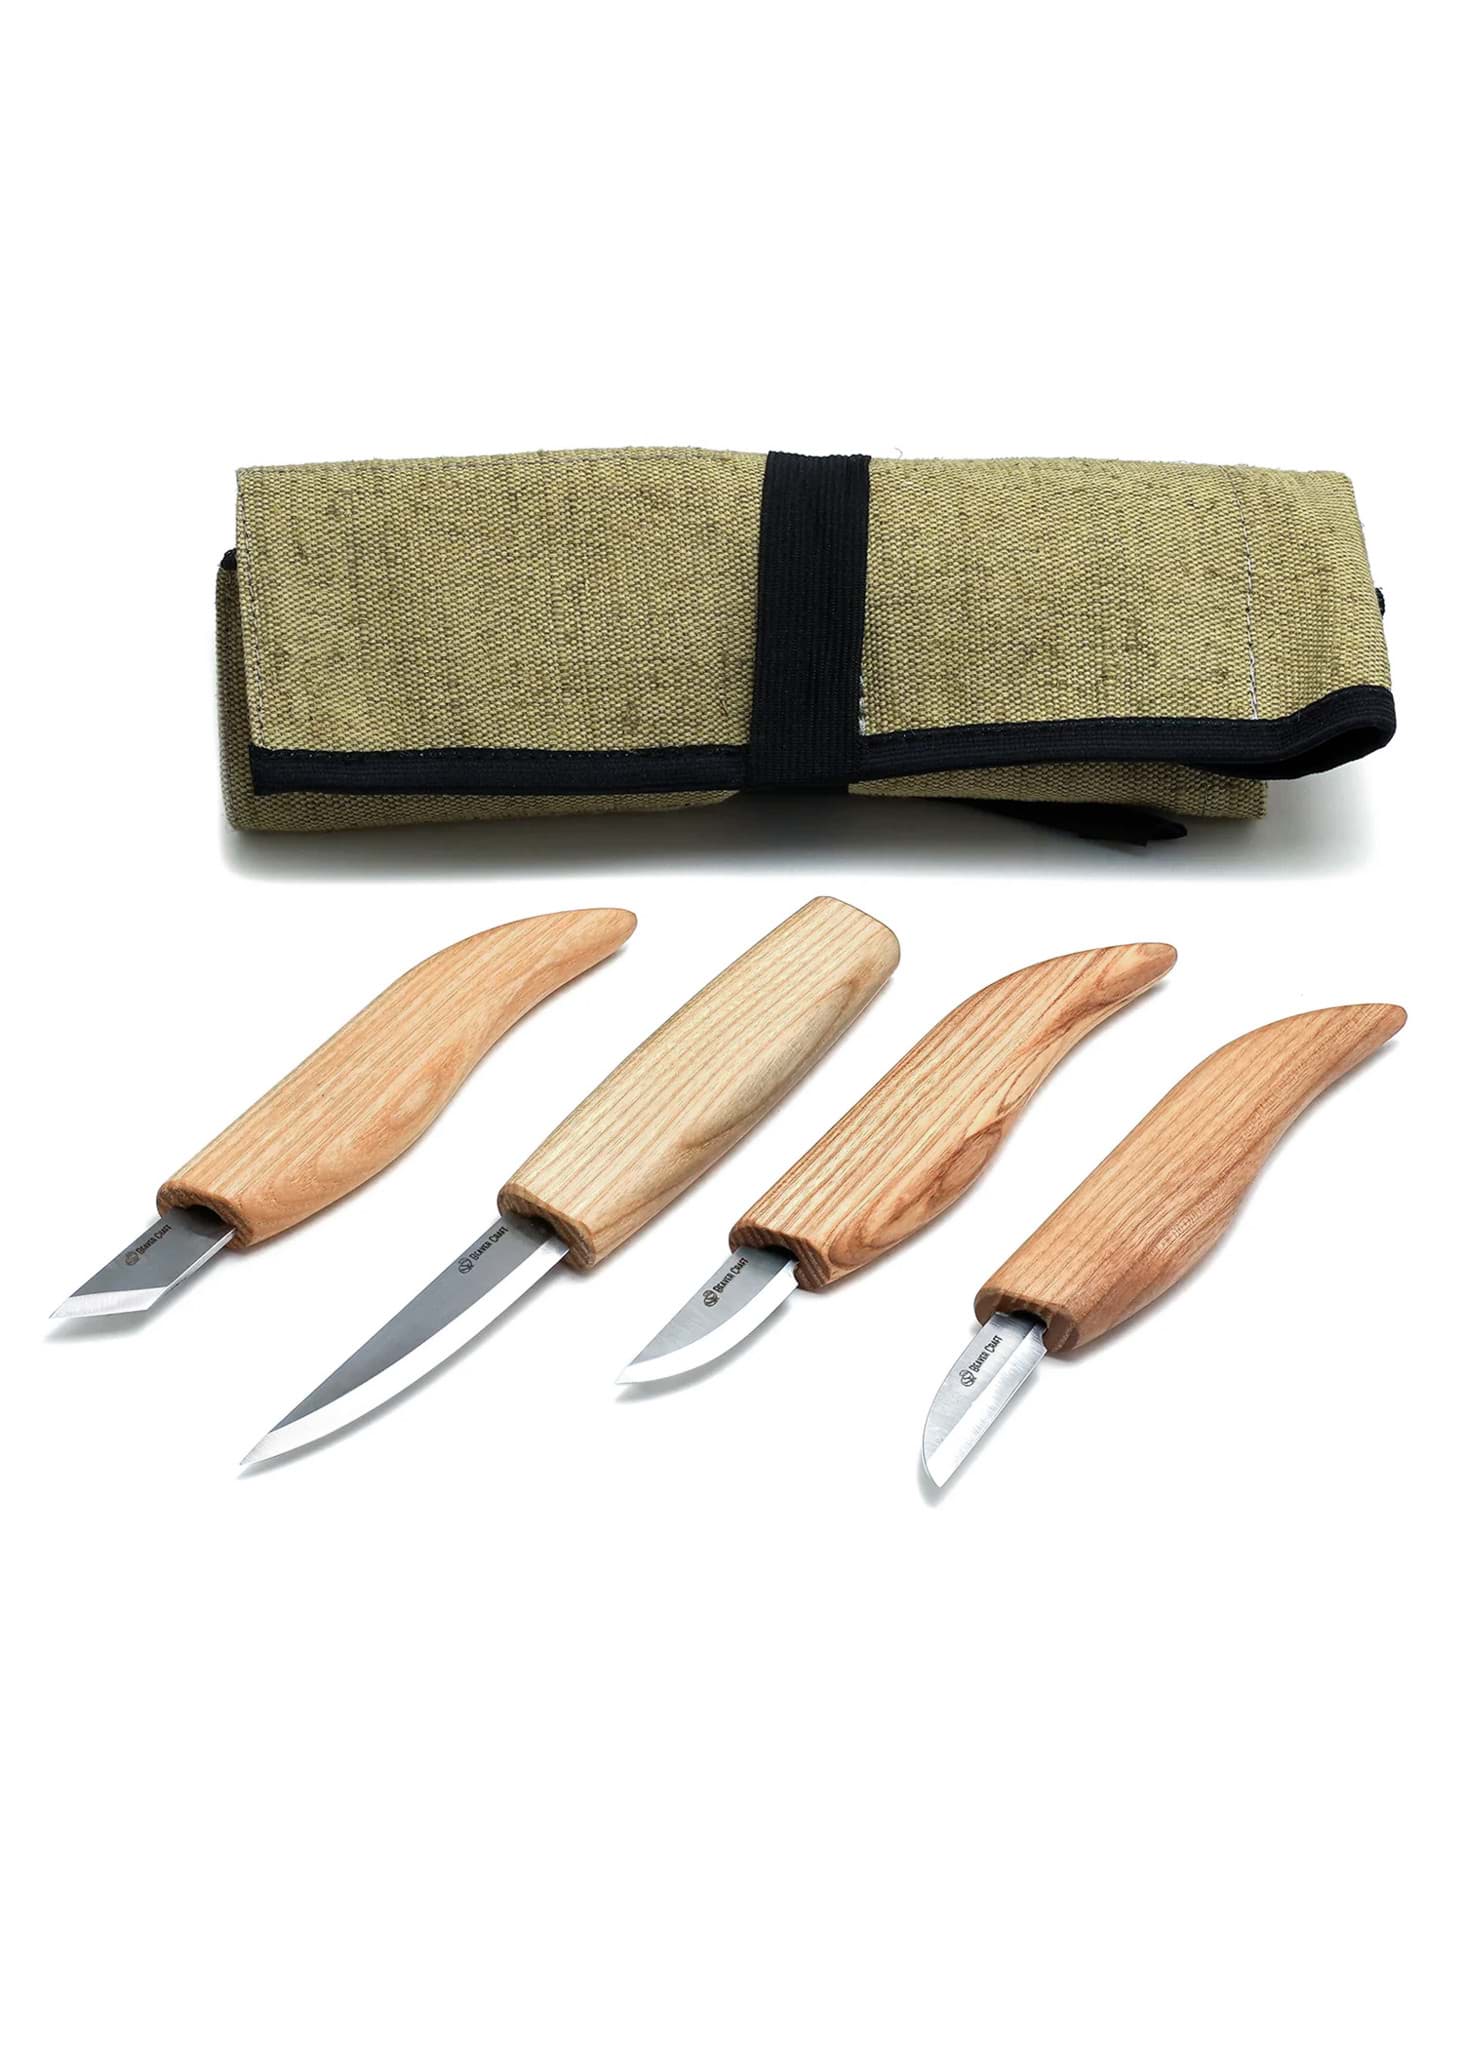 Picture of BeaverCraft - Basic Wood Carving Set 4-Piece with Roll